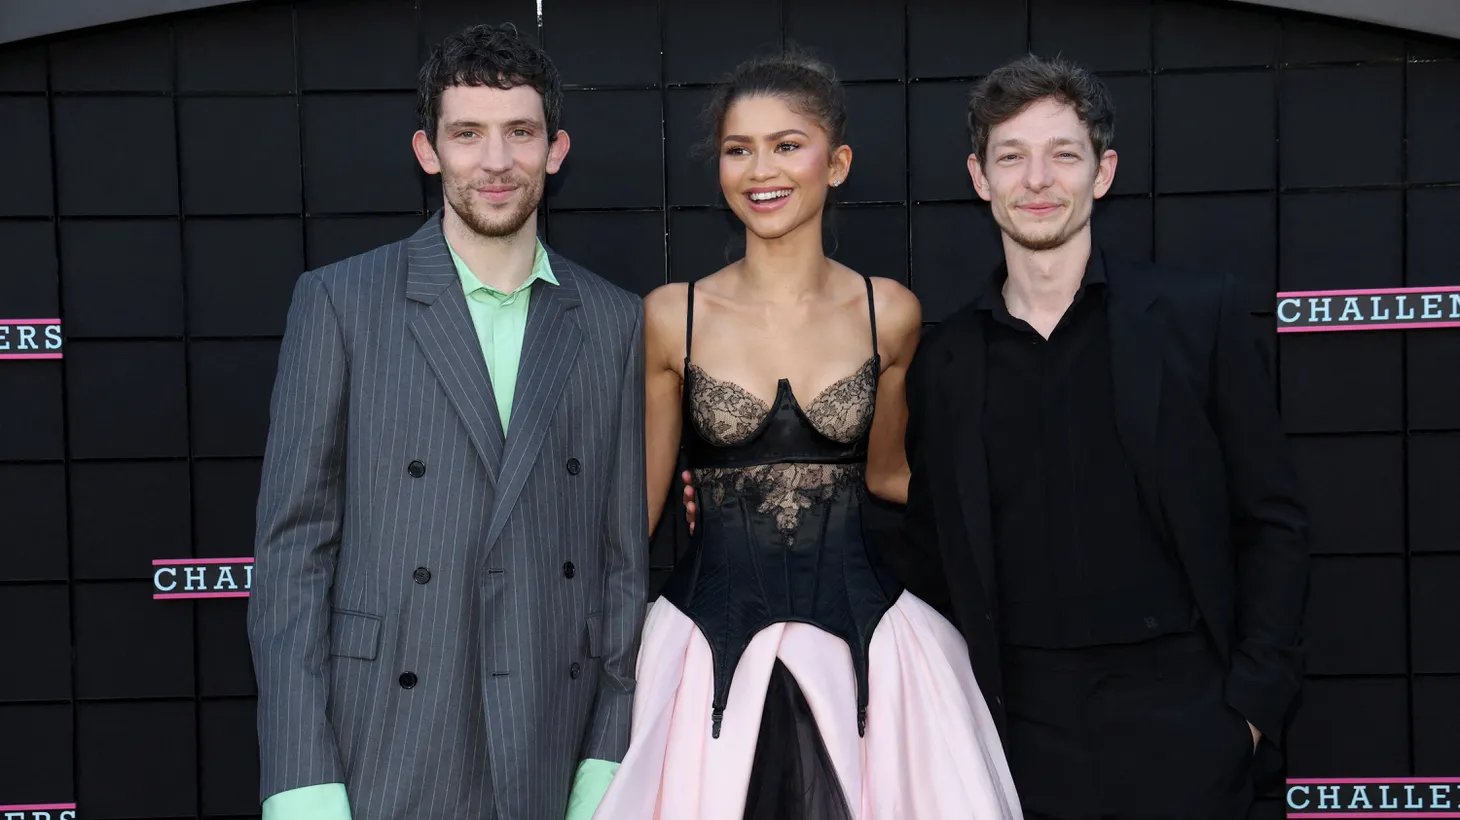 Cast members Zendaya, Mike Faist and Josh O'Connor attend a premiere for the film "Challengers" in Los Angeles, California.